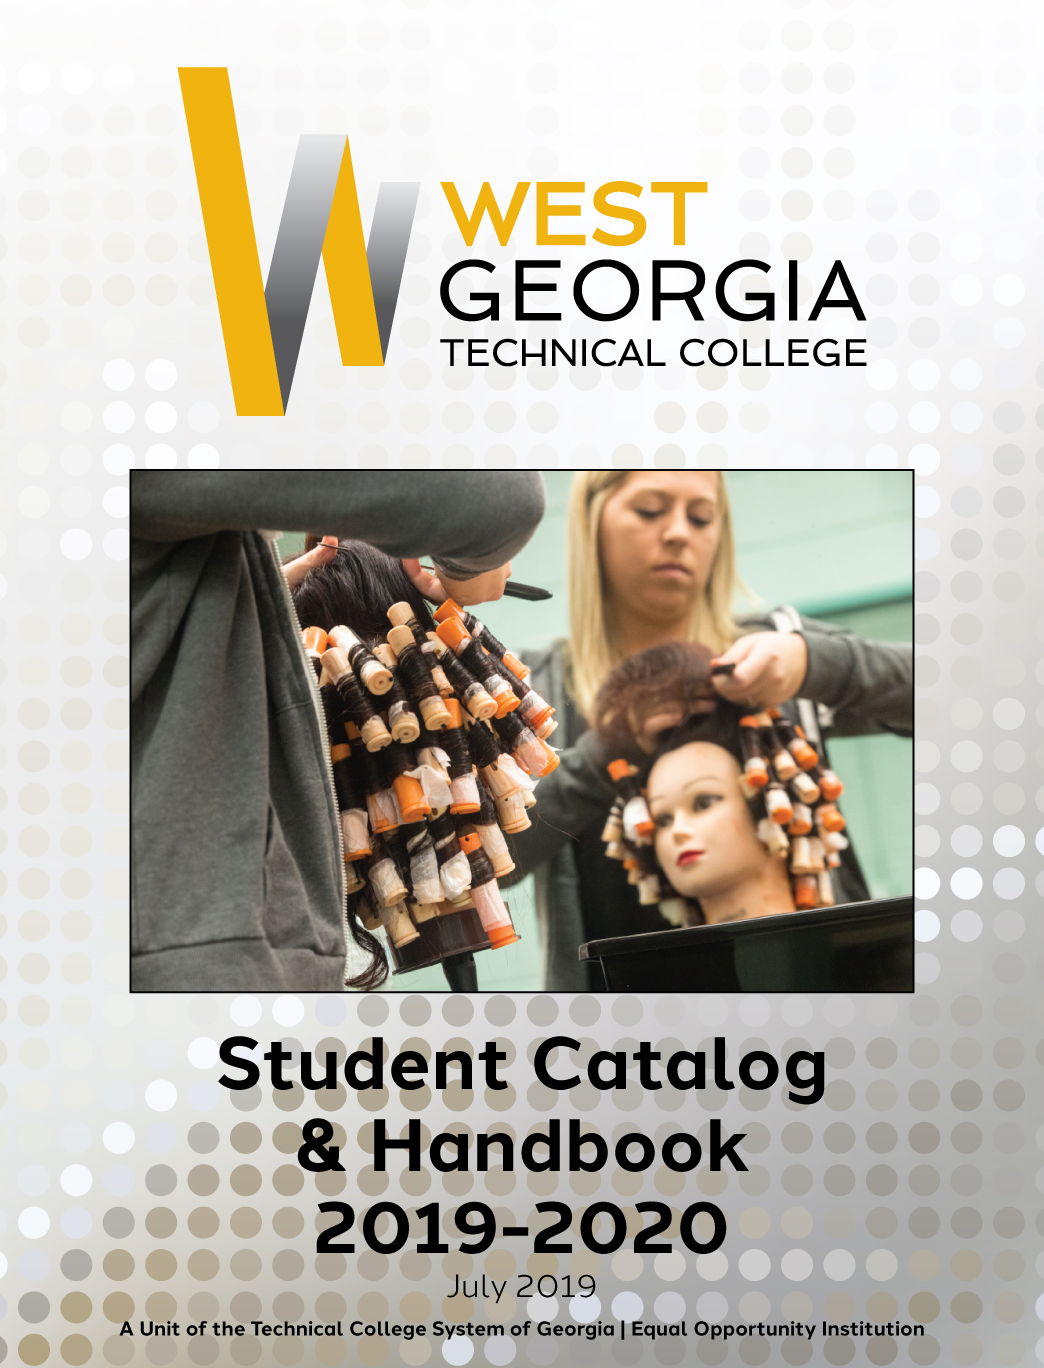 West Georgia Technical College Student Catalog and Handbook Cover 2019-2020. Image shows a young woman putting rollers in the hair of a cosmetology manikin. 